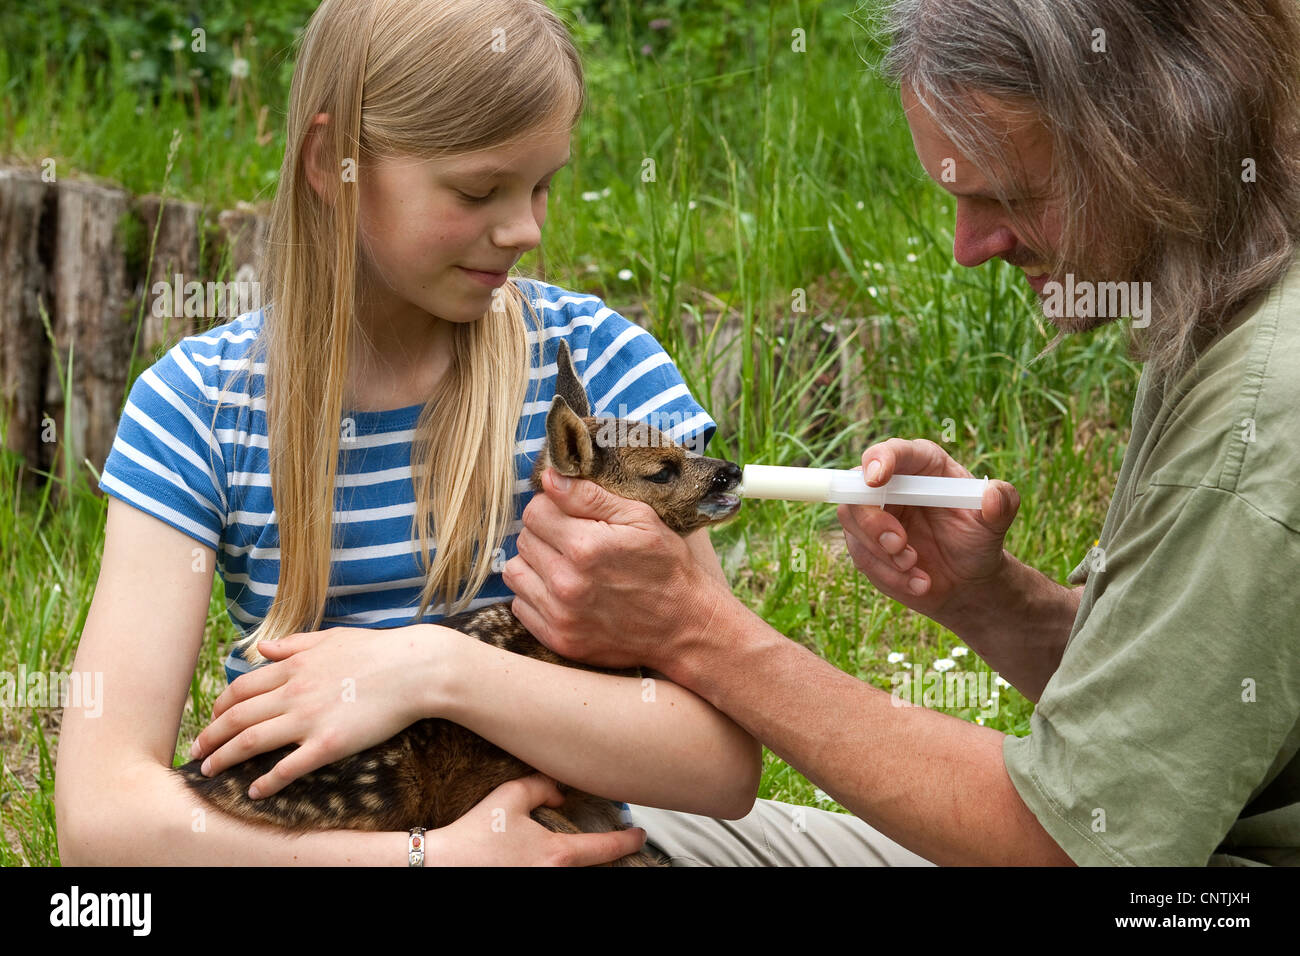 roe deer (Capreolus capreolus), fawn in the arms of a girl is feeded with an injection, Germany Stock Photo